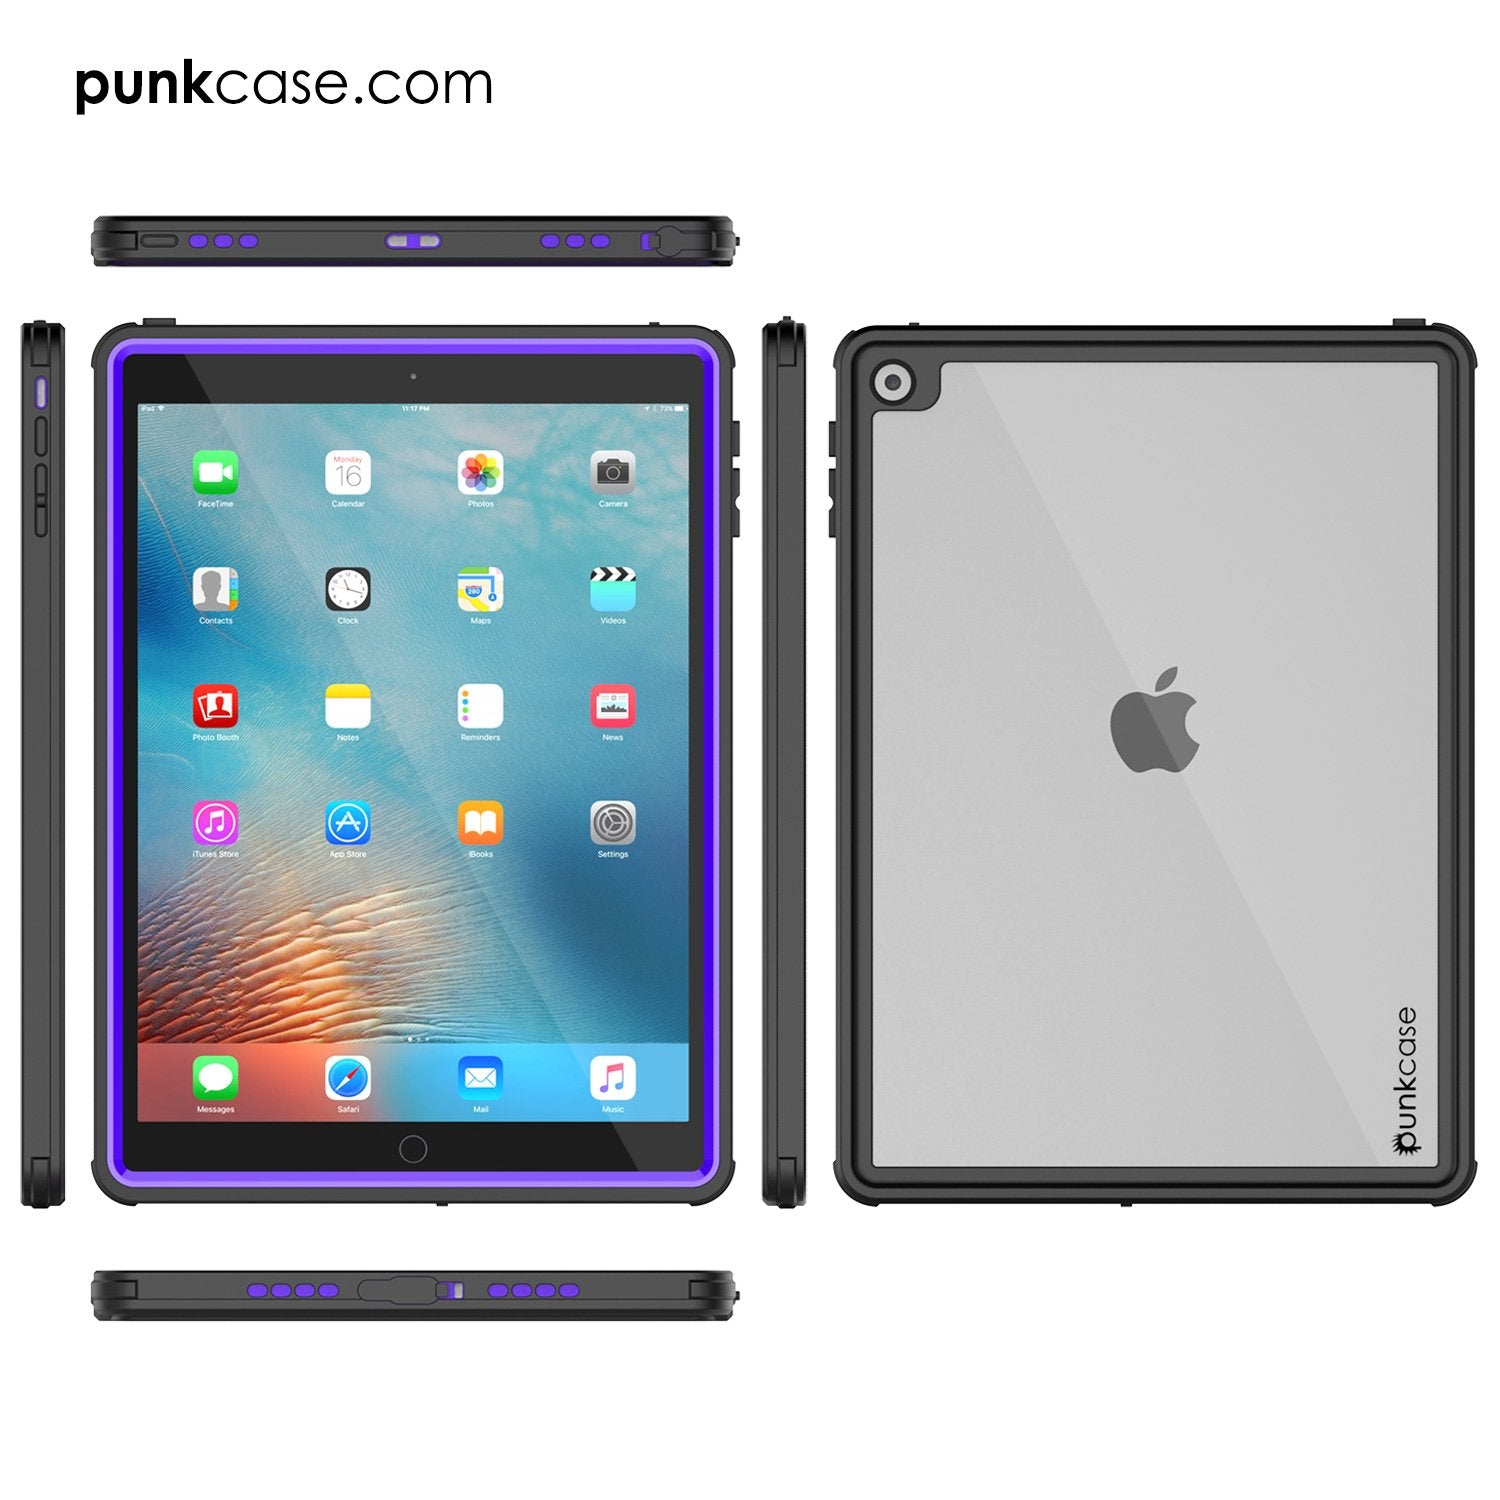 Punkcase iPad Pro 9.7 Case [CRYSTAL Series], Waterproof, Ultra-Thin Cover [Shockproof] [Dustproof] with Built-in Screen Protector [Purple]